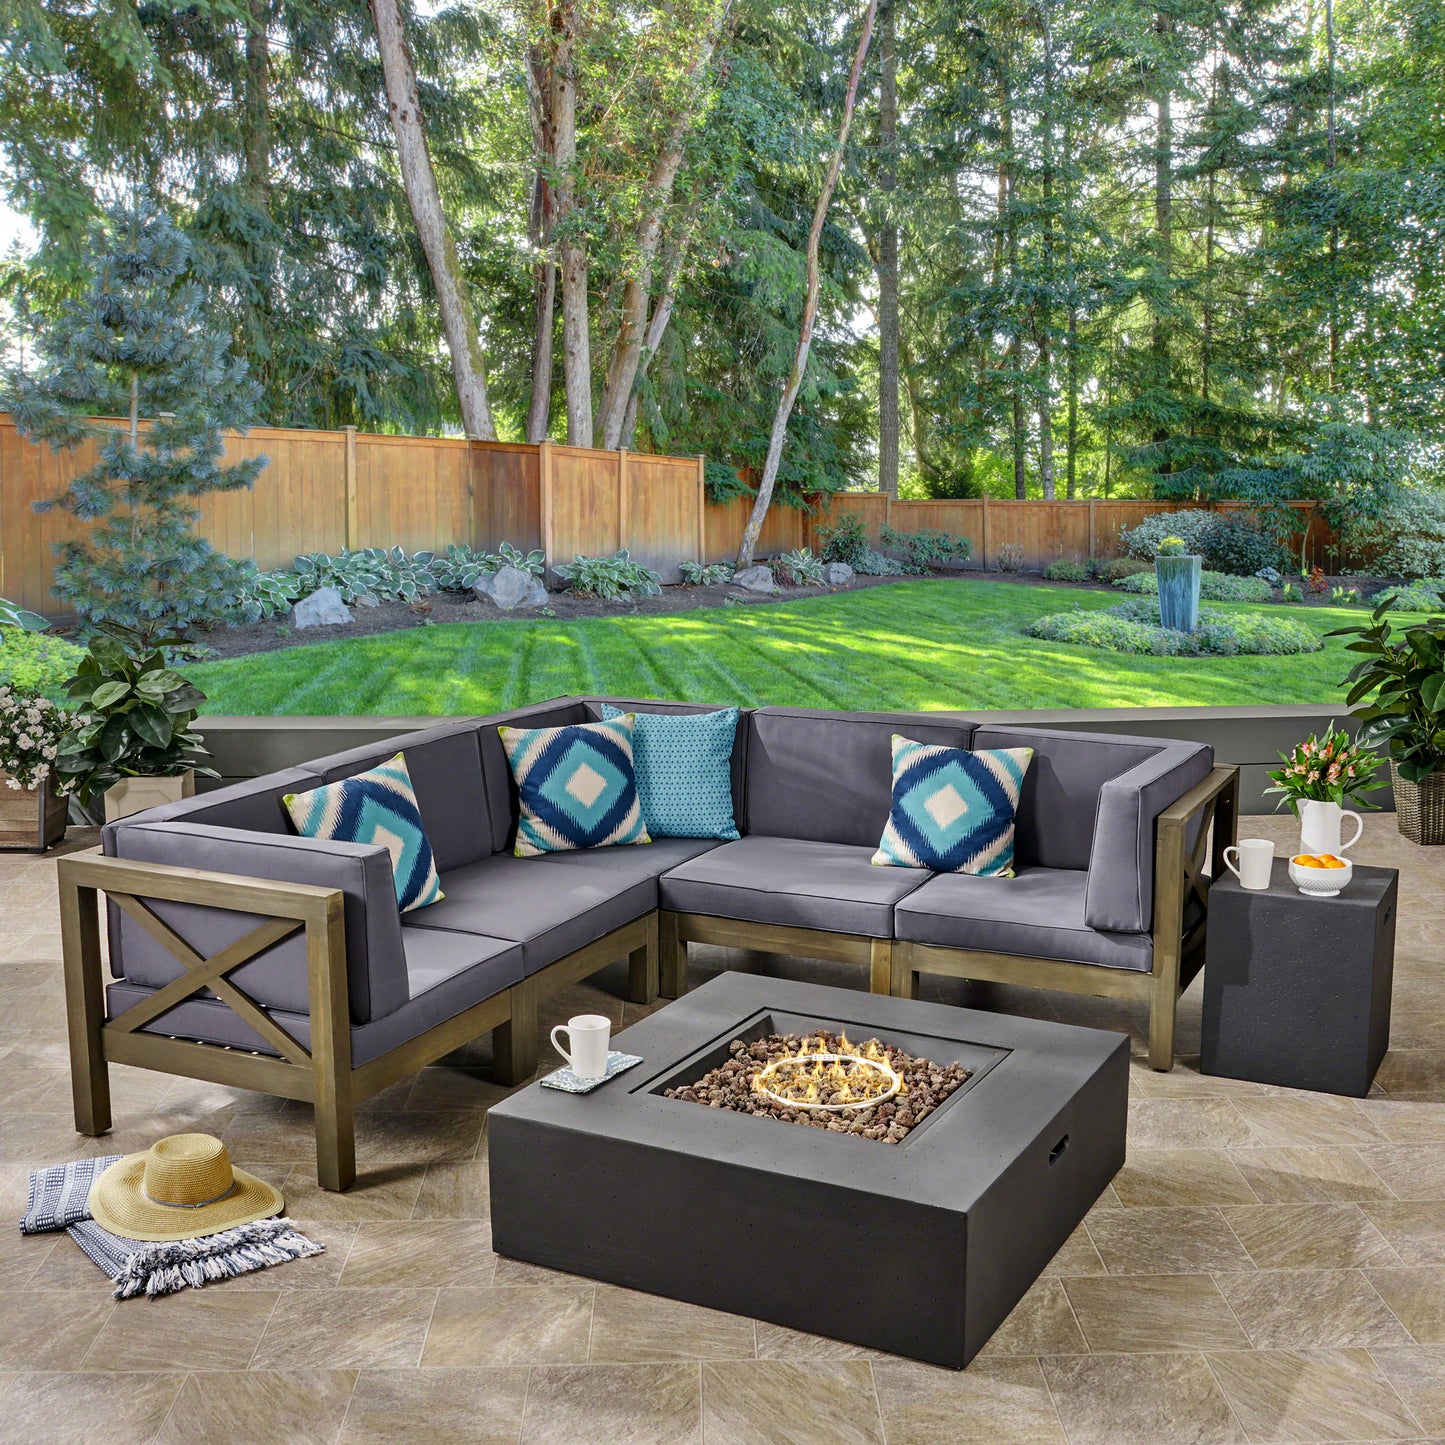 Kaylee Outdoor Acacia Wood 5 Seater Sectional Sofa Set with Fire Pit